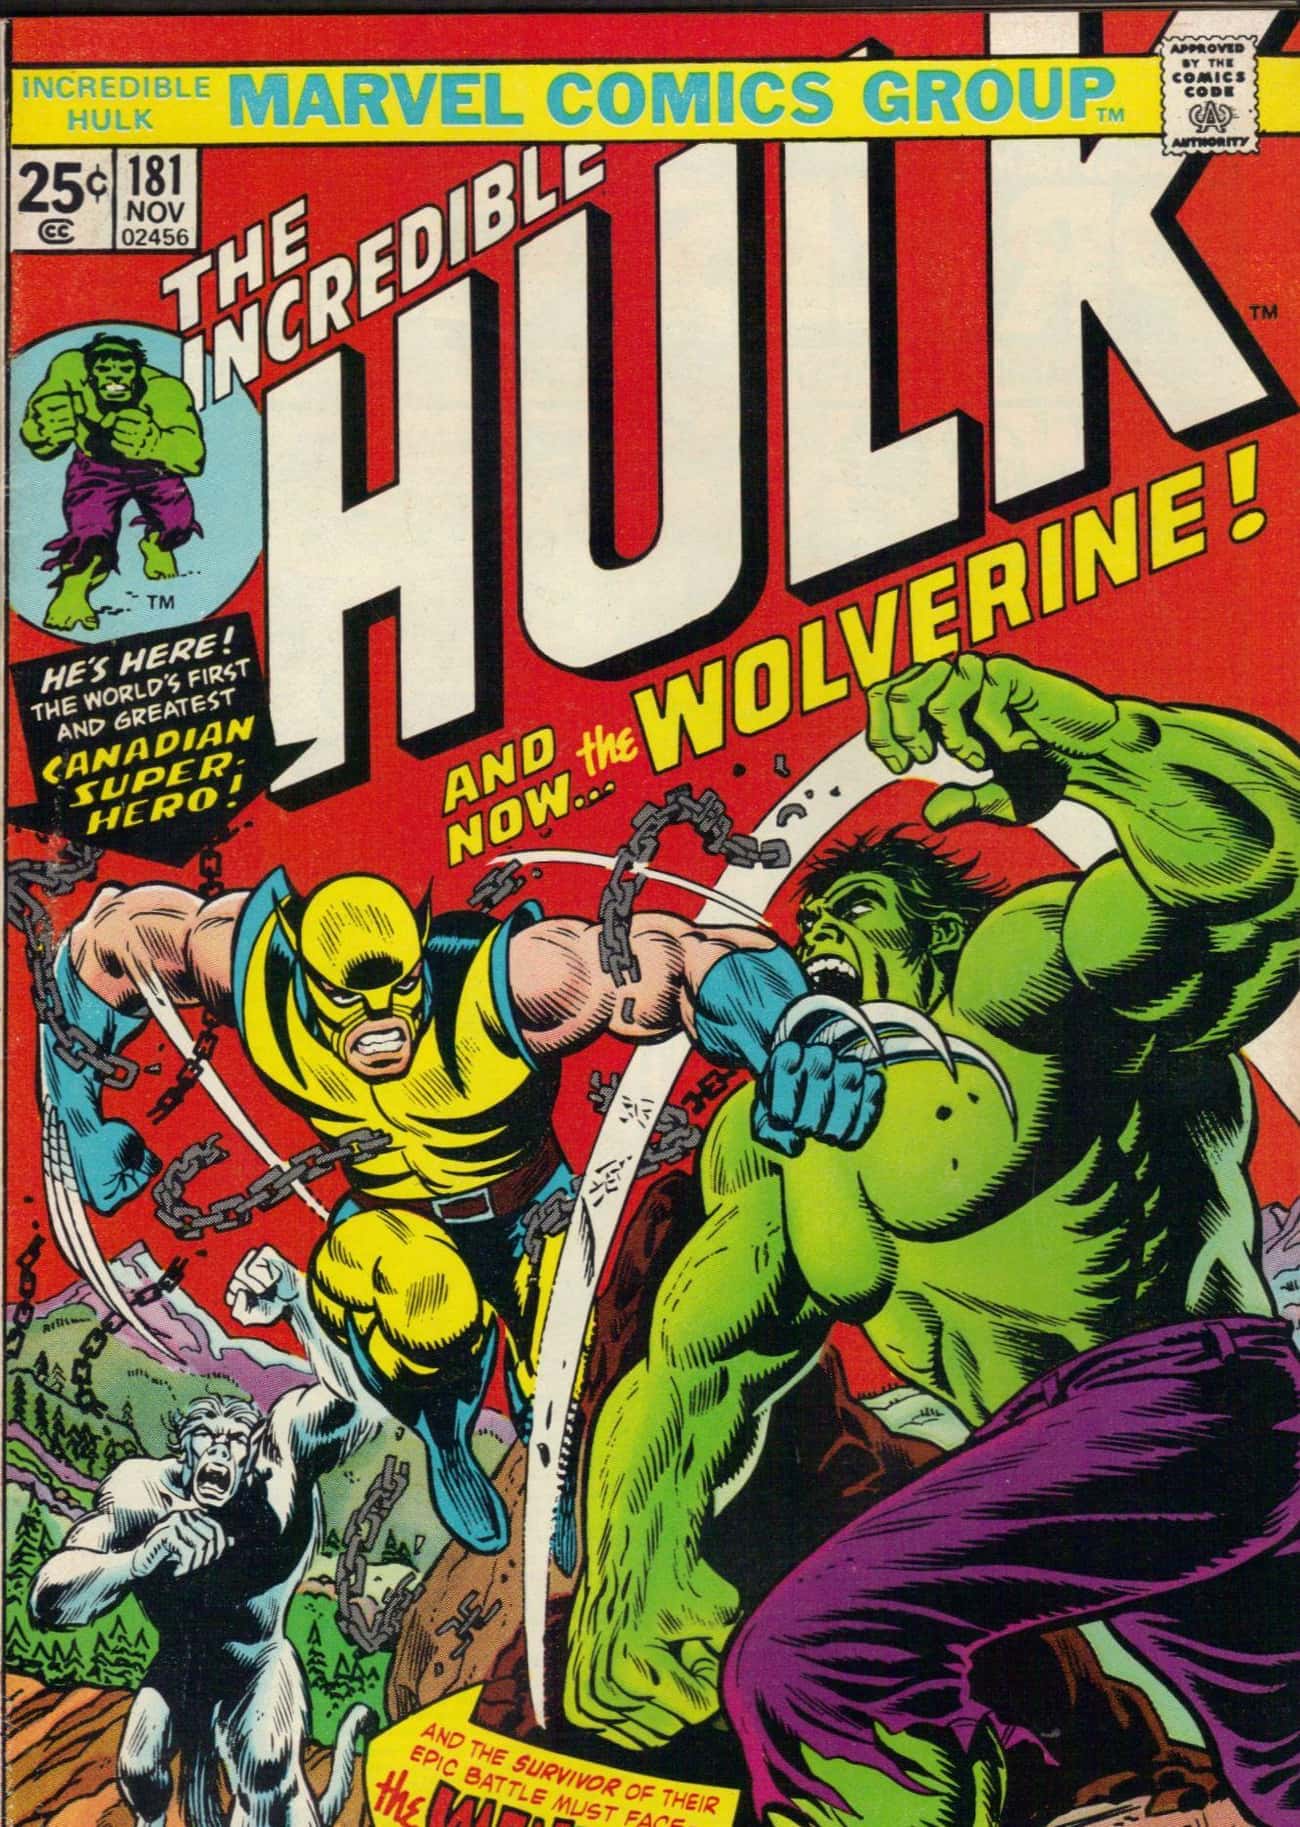 Wolverine Started Out As A Hulk Antagonist In A Backdoor Pilot